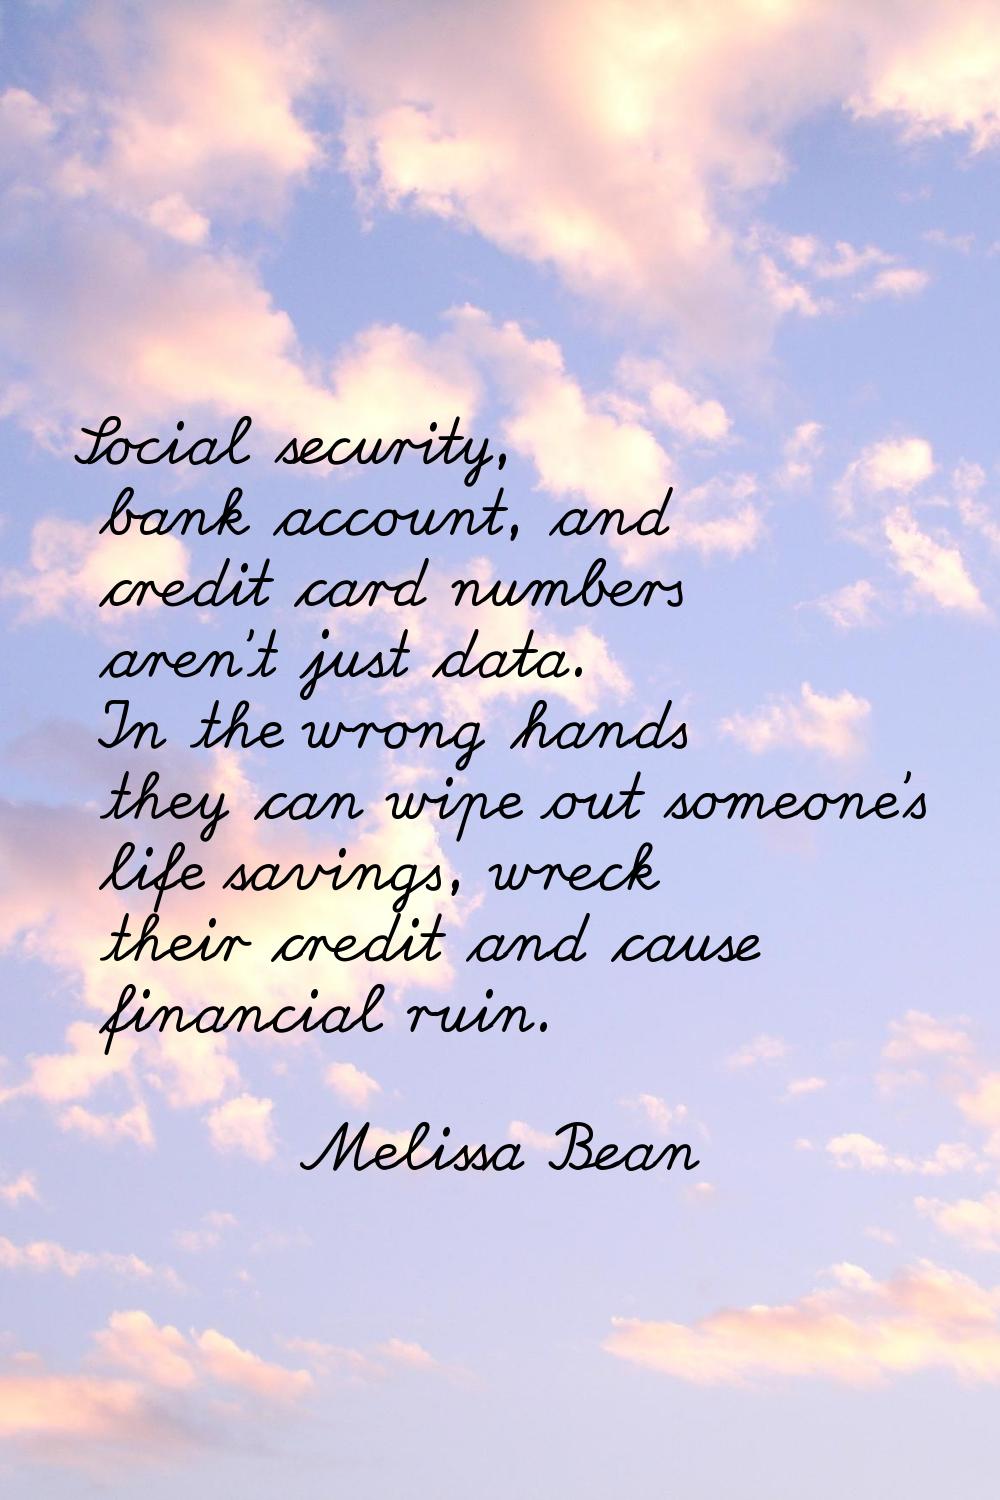 Social security, bank account, and credit card numbers aren't just data. In the wrong hands they ca